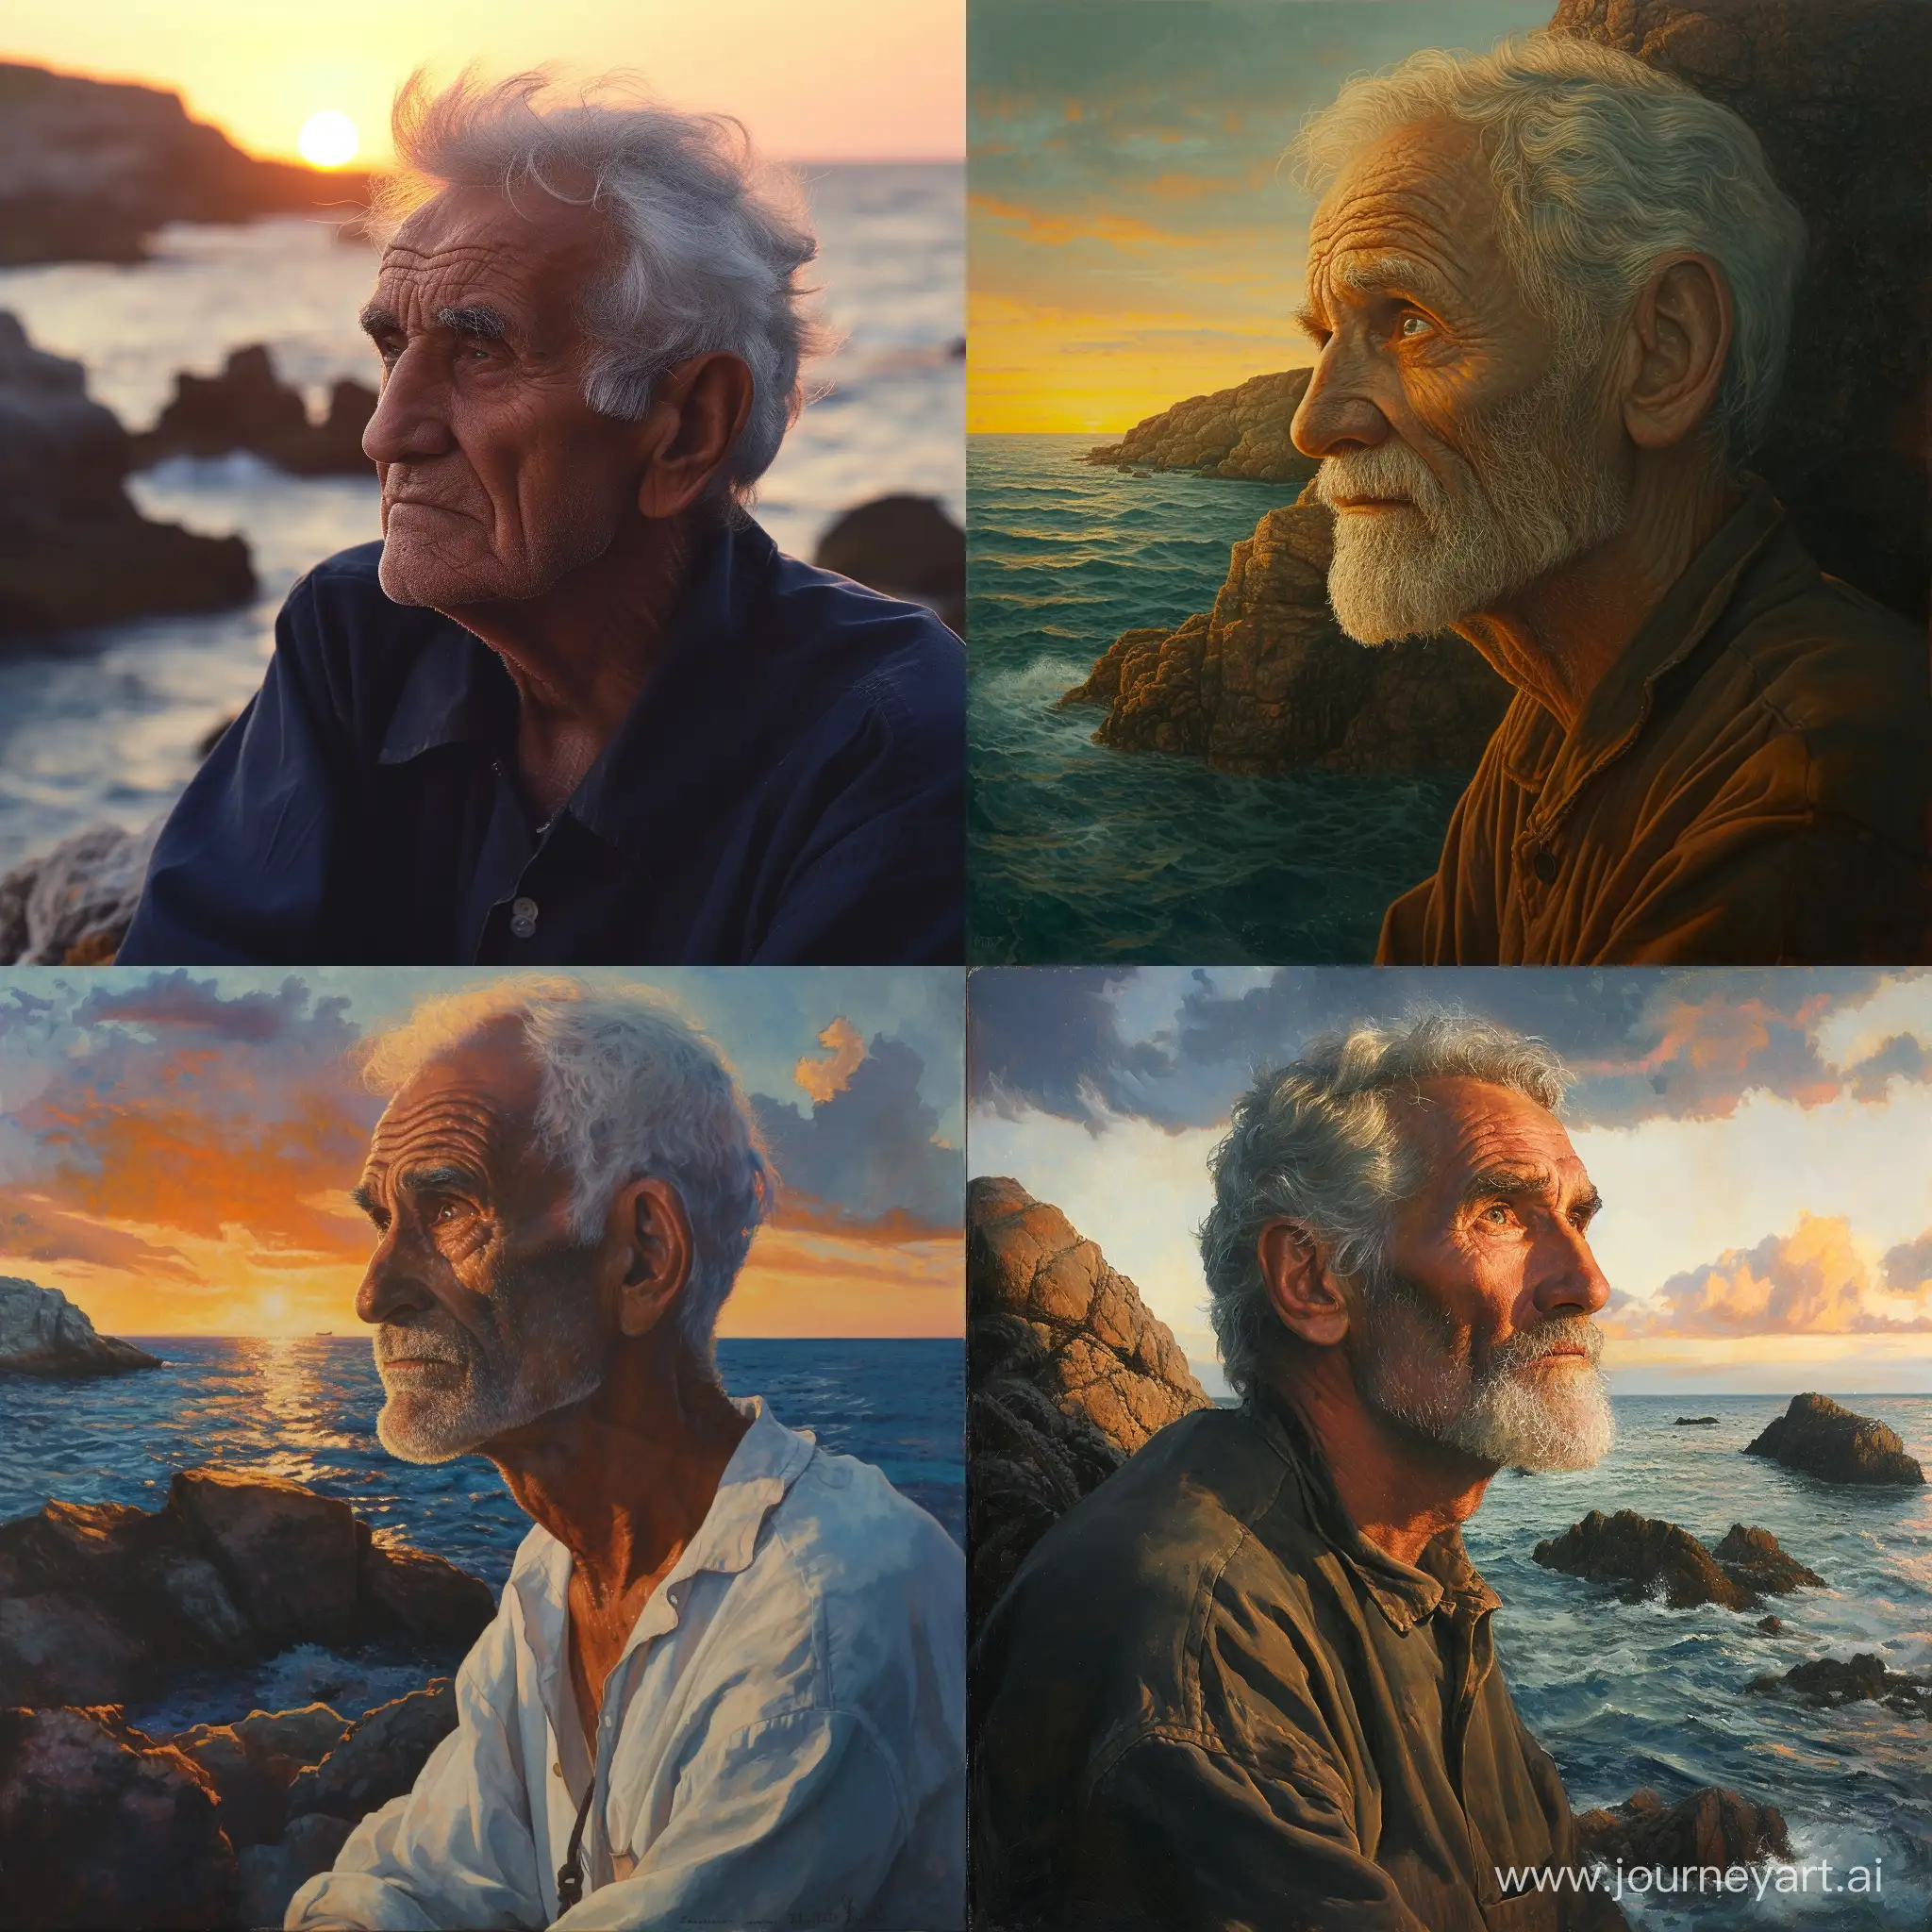 Contemplative-Elderly-Sailor-Gazing-into-Sunset-by-the-Sea